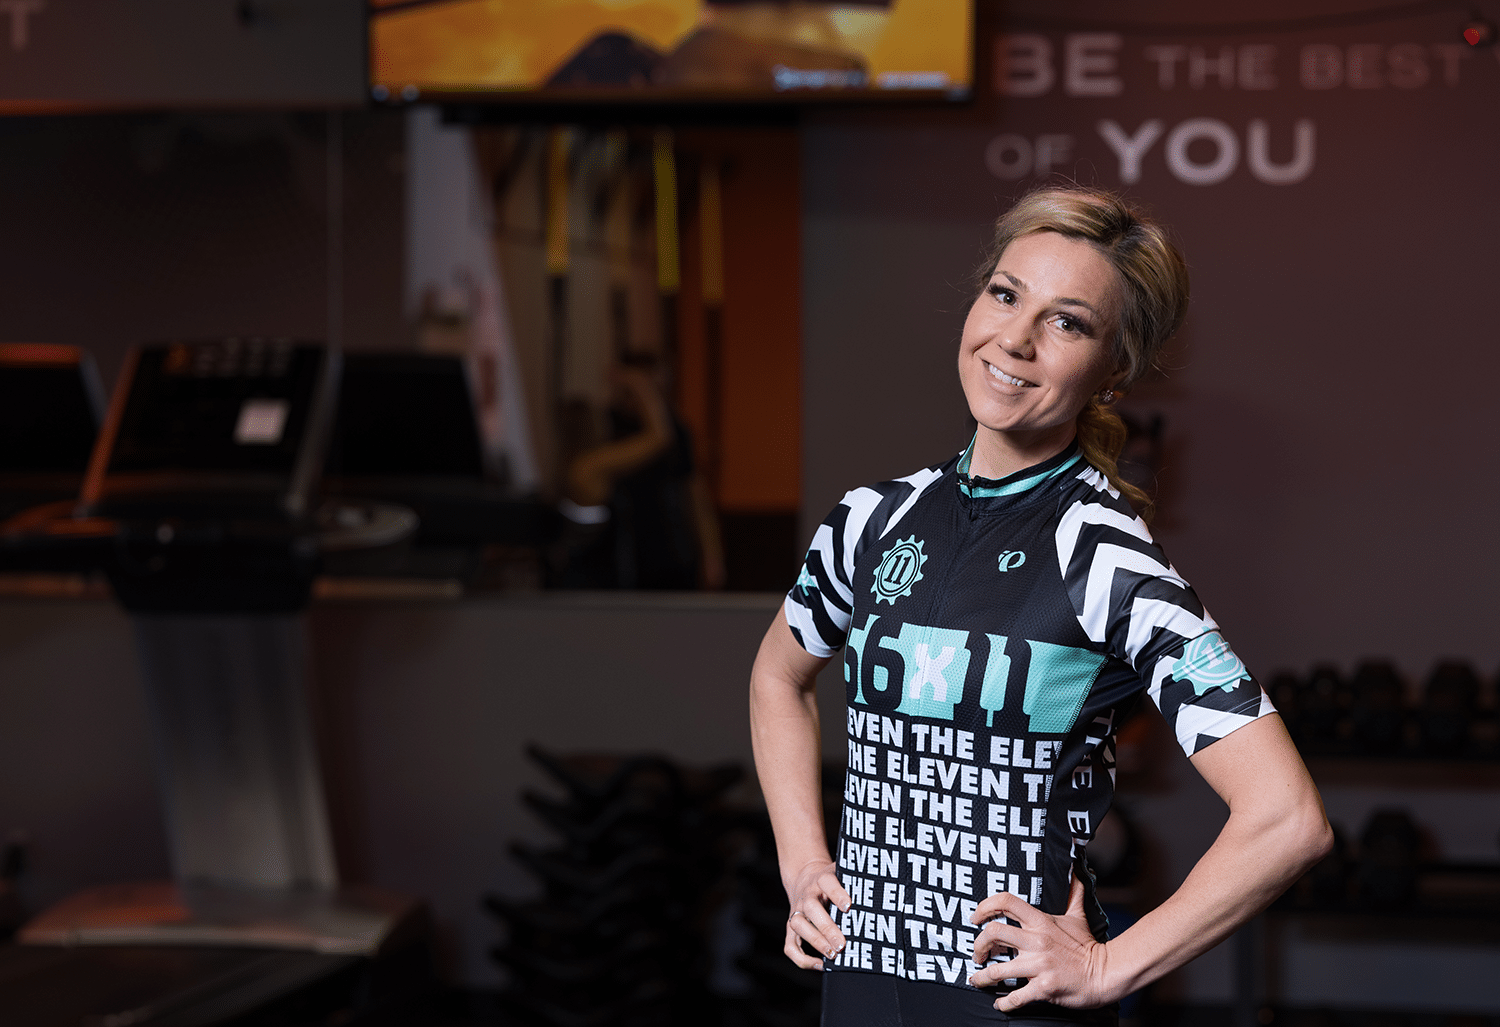 Angella Gorad posing for the camera in a cycling outfit in a gym setting. A treadmill and some free weights are displayed in the background.